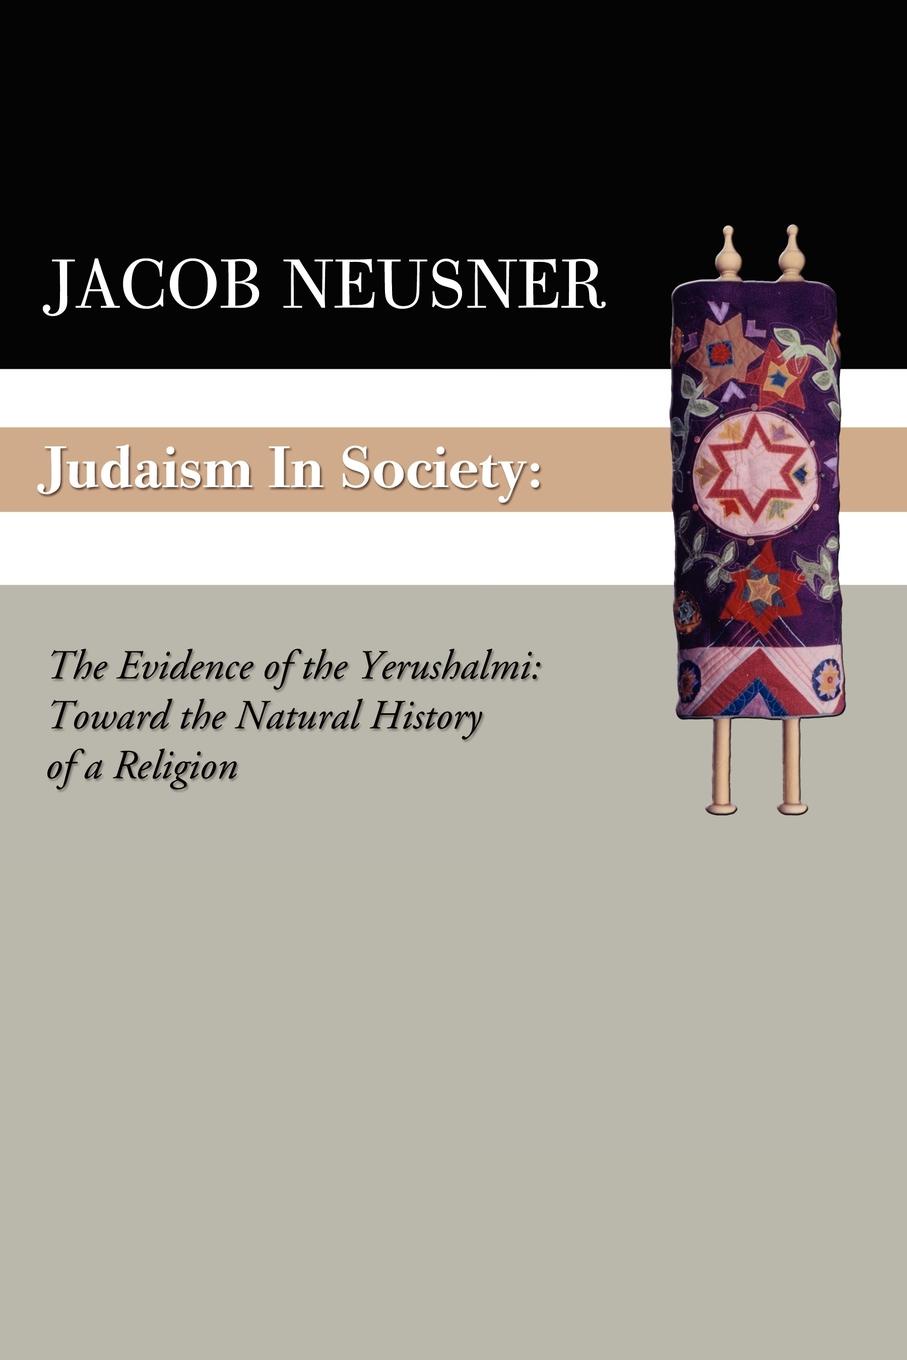 Judaism in Society. The Evidence of the Yerushalmi: Toward the Natural History of a Religion